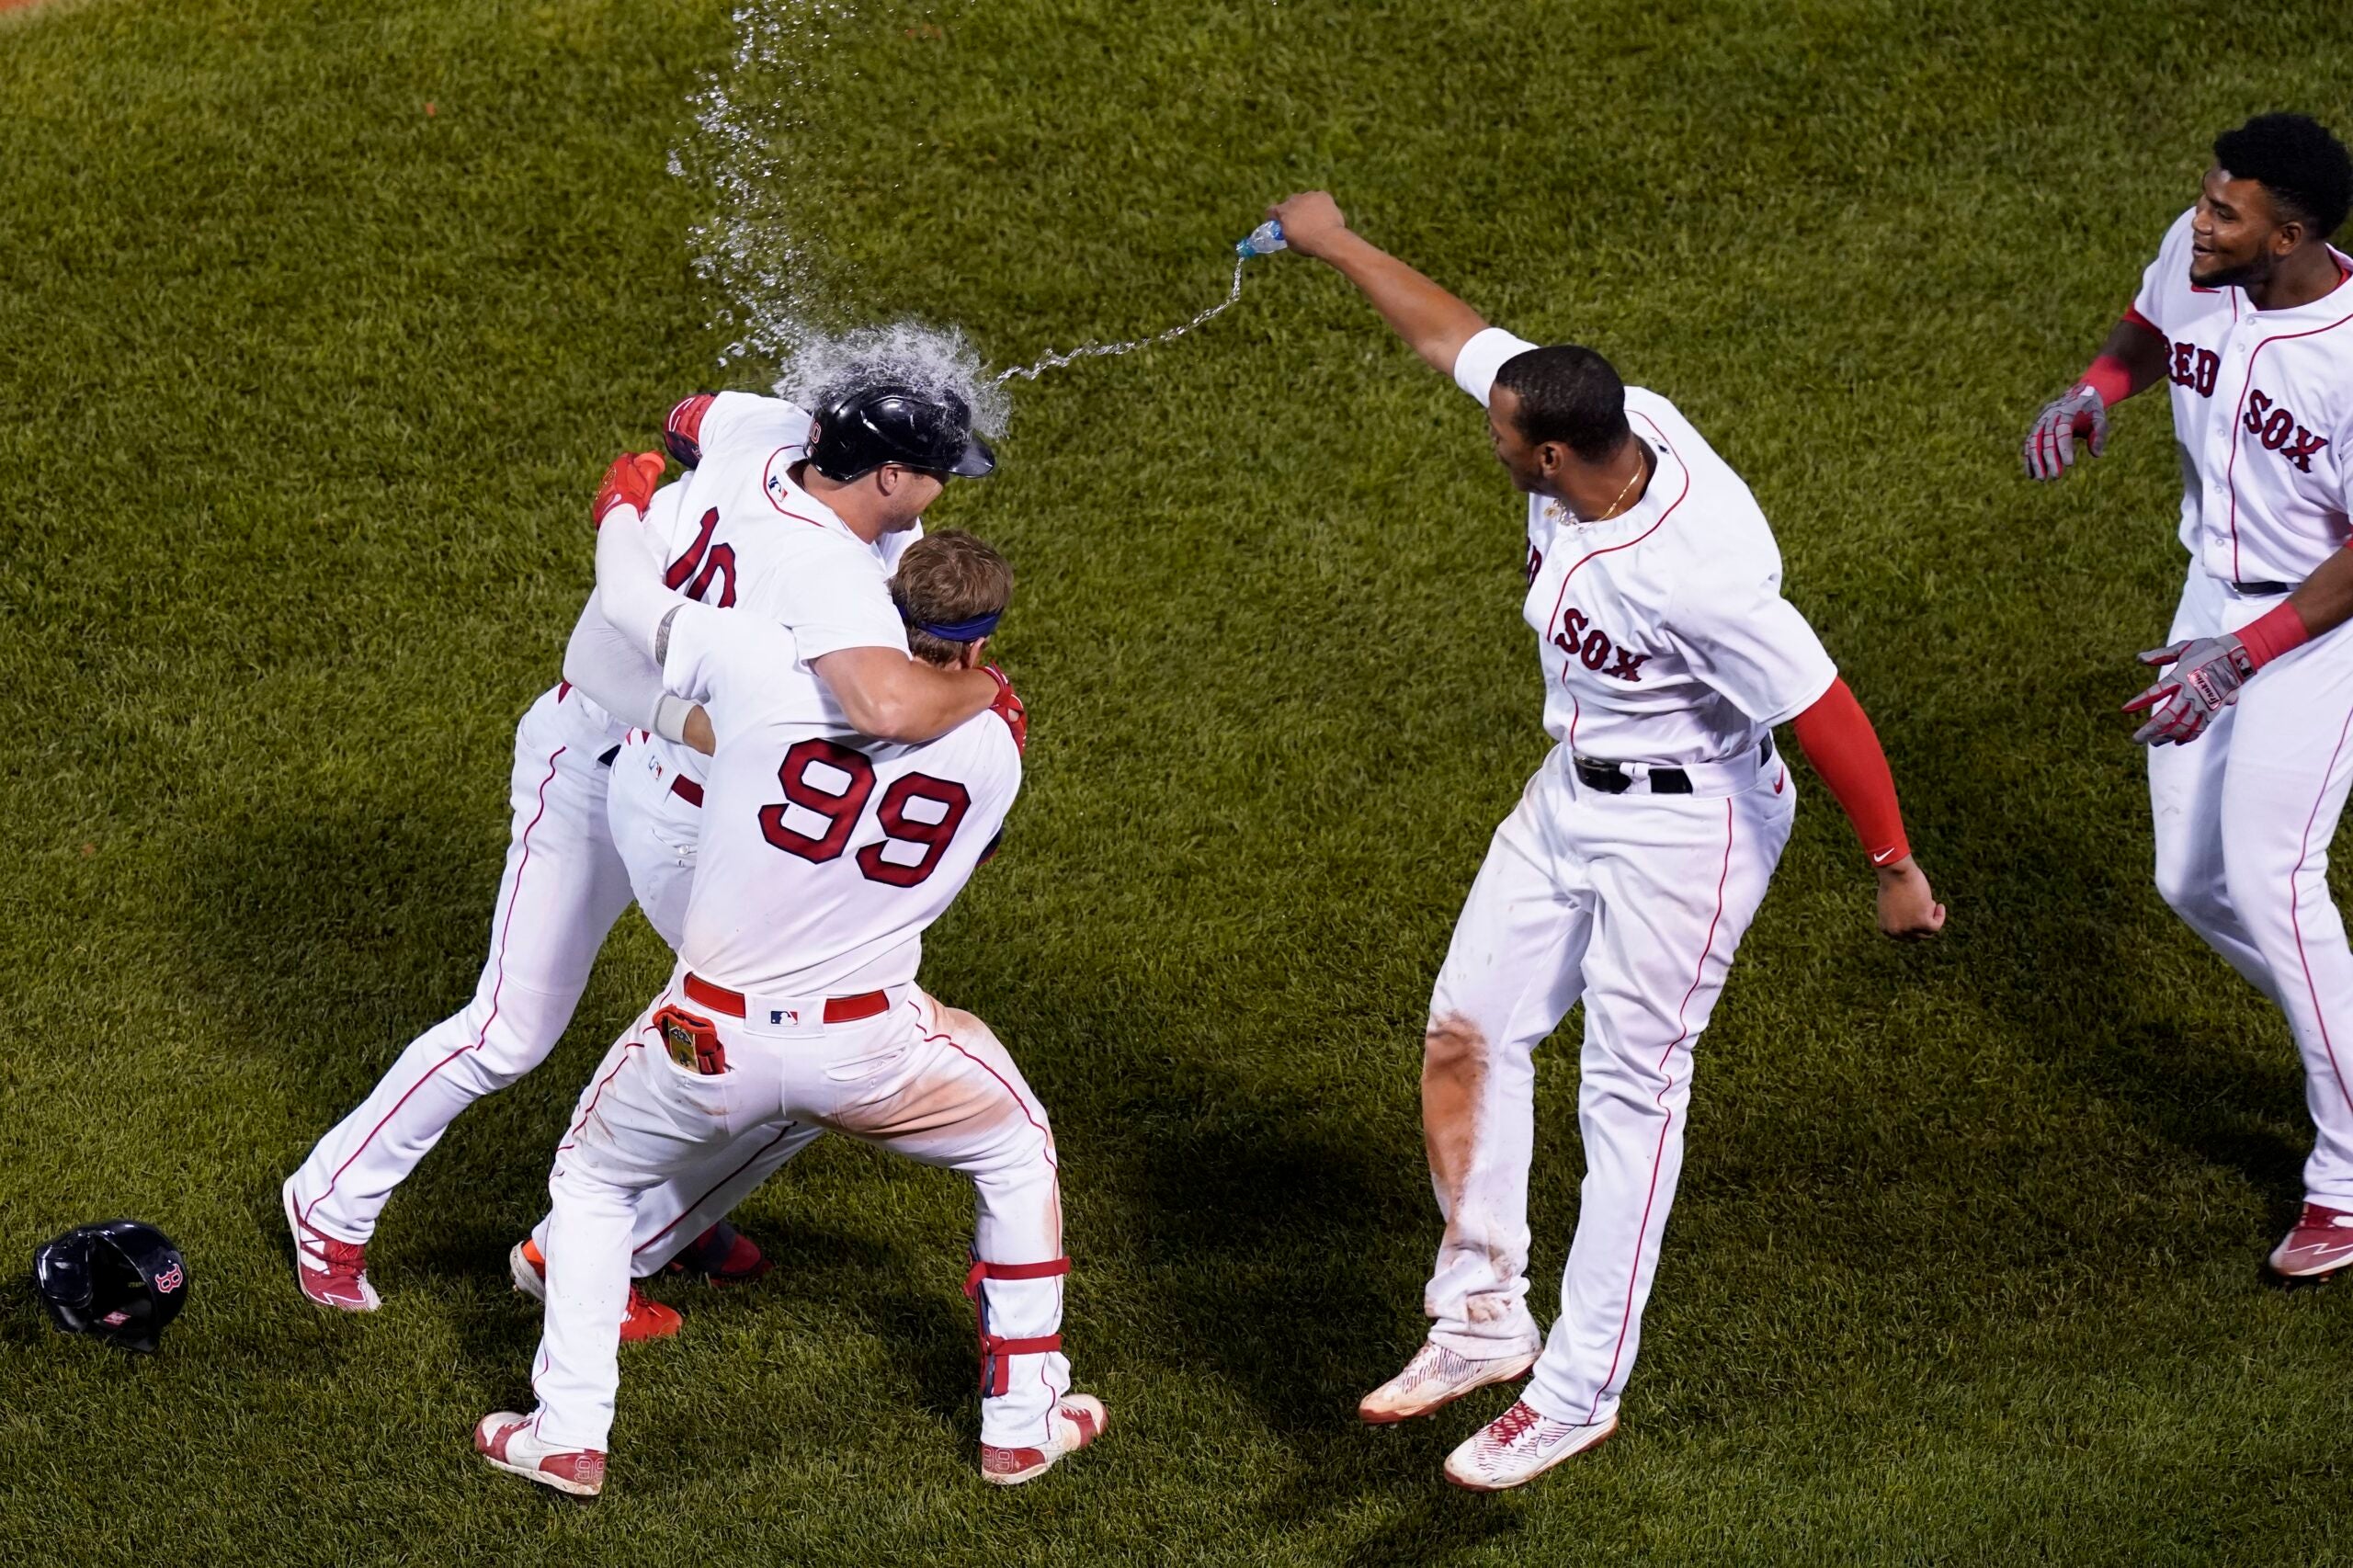 4 takeaways as the Red Sox rallied three times to outlast the Yankees, 5-4